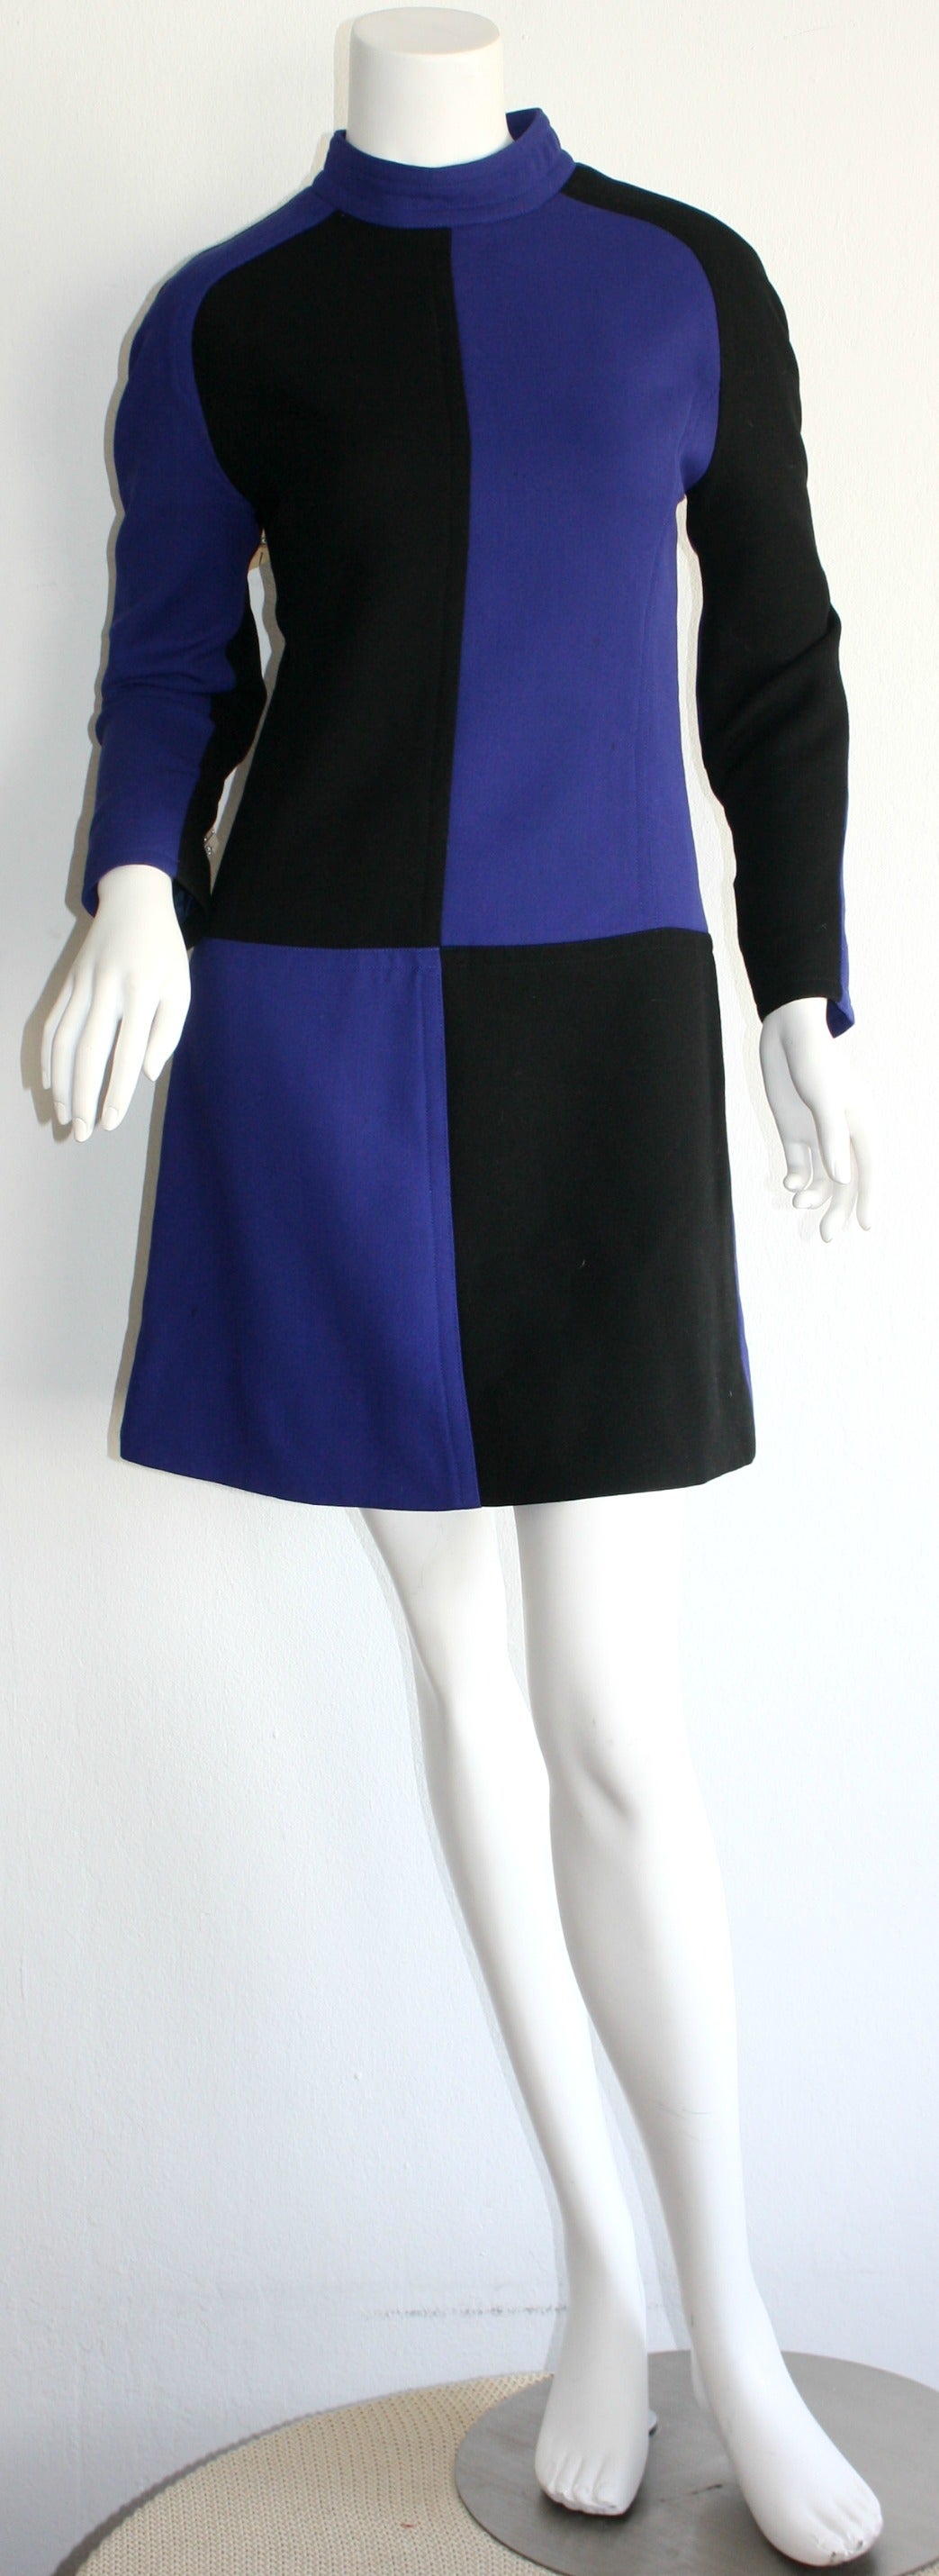 Make the perfect statement in this collectible Andre Courreges dress!!! Mr. Courreges just passed away this past week, so I am highlighting some of his iconic pieces from my collection. This dress is of museum quality, but is also worthy of any